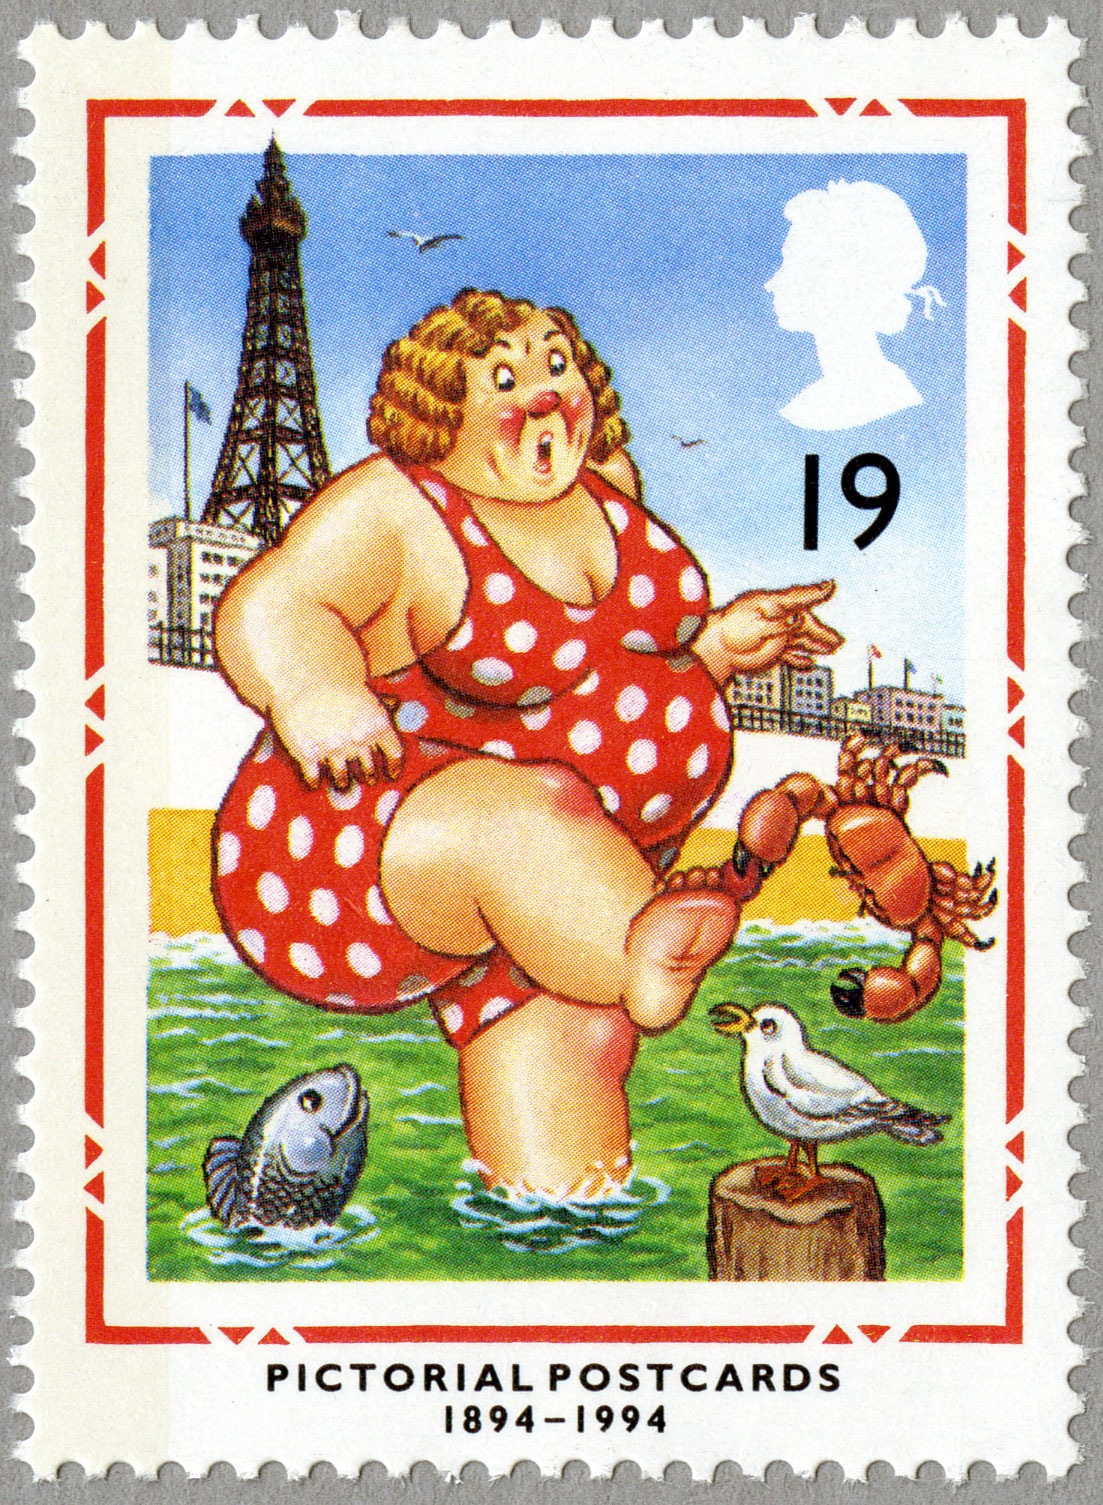 Similar caricatures appear in the 1994 stamp issue celebrating 100 years of the picture postcard. 19p, Pictorial Postcards, 1994